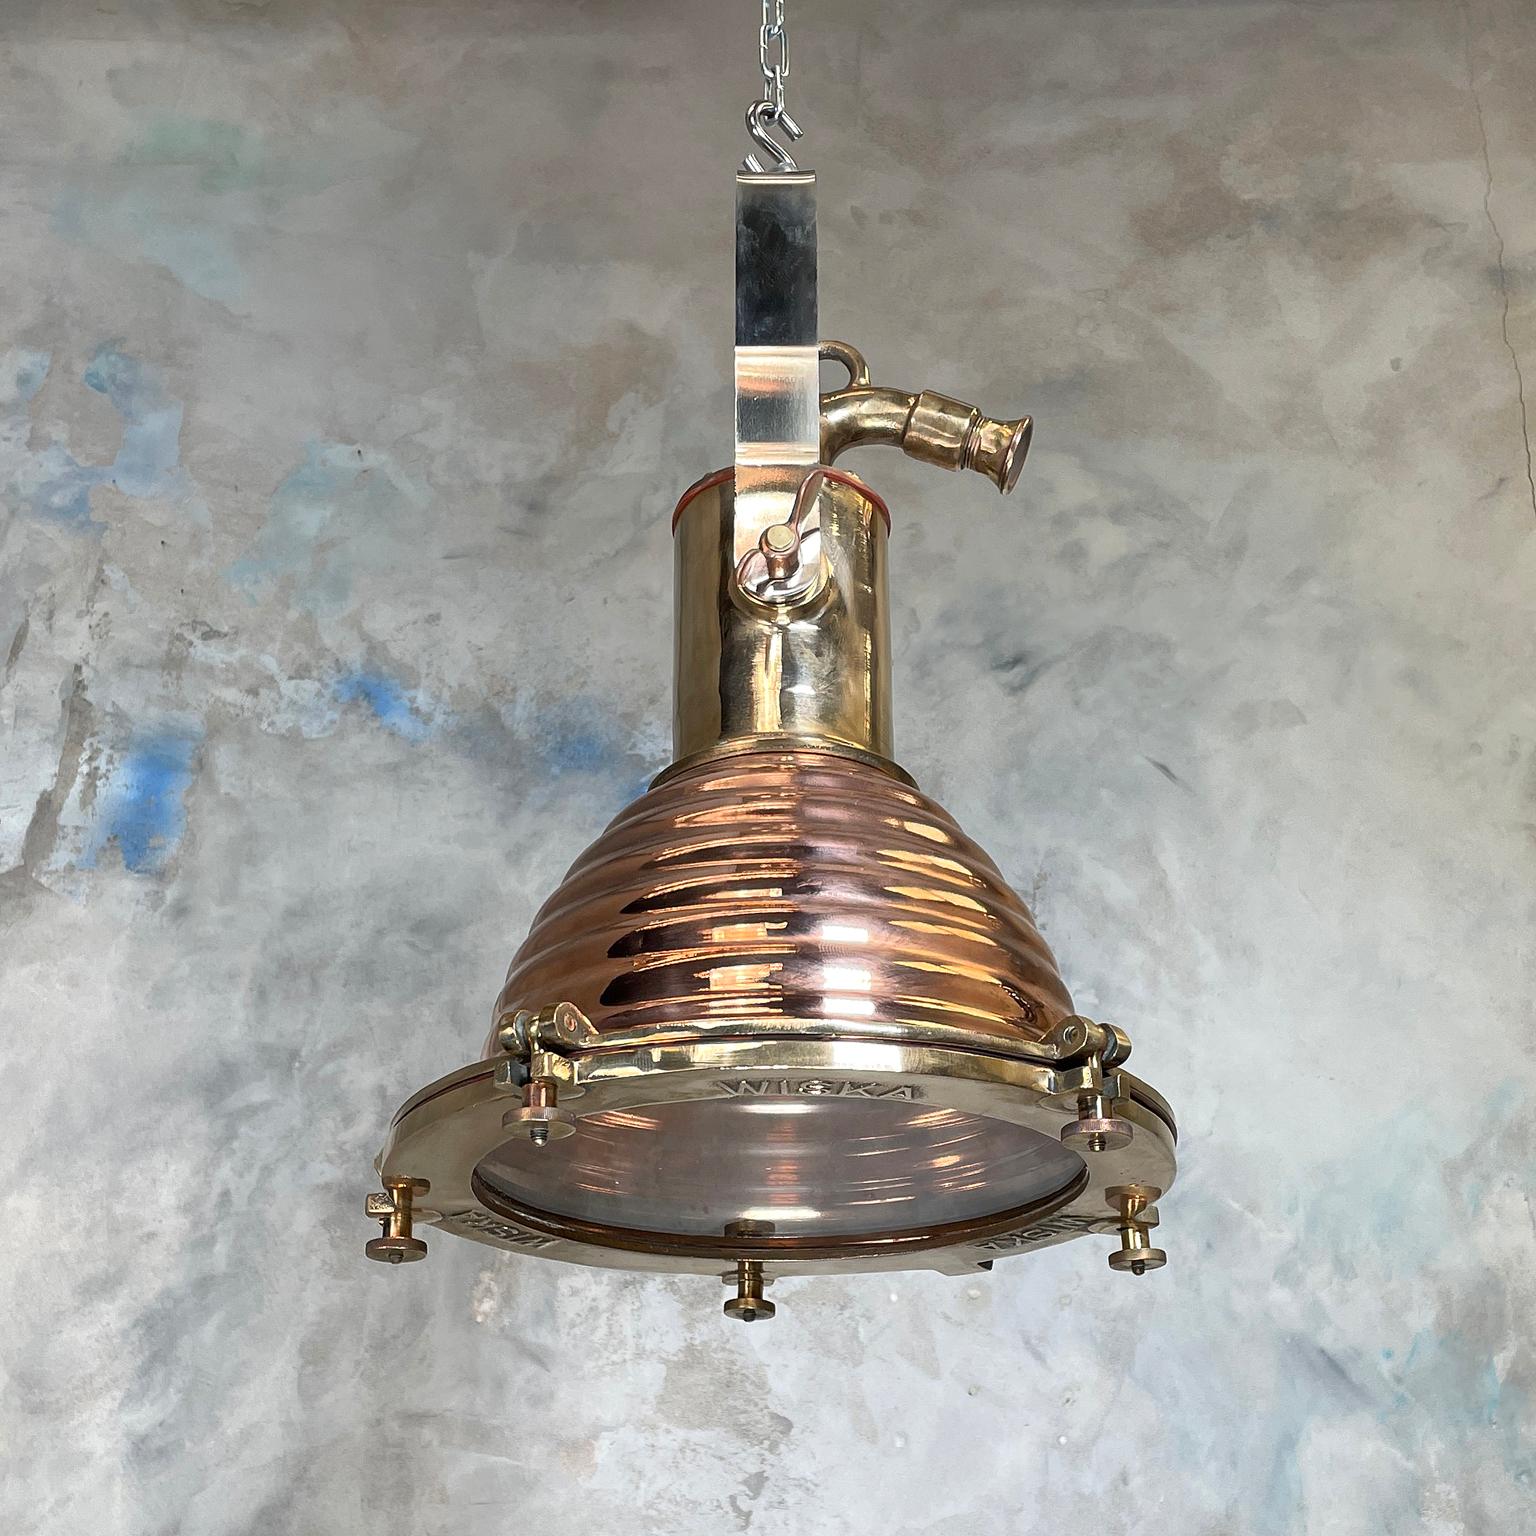 Late 20th Century 1970s German Wiska Spun Copper and Cast Brass Fluted Cargo Ceiling Pendant Light